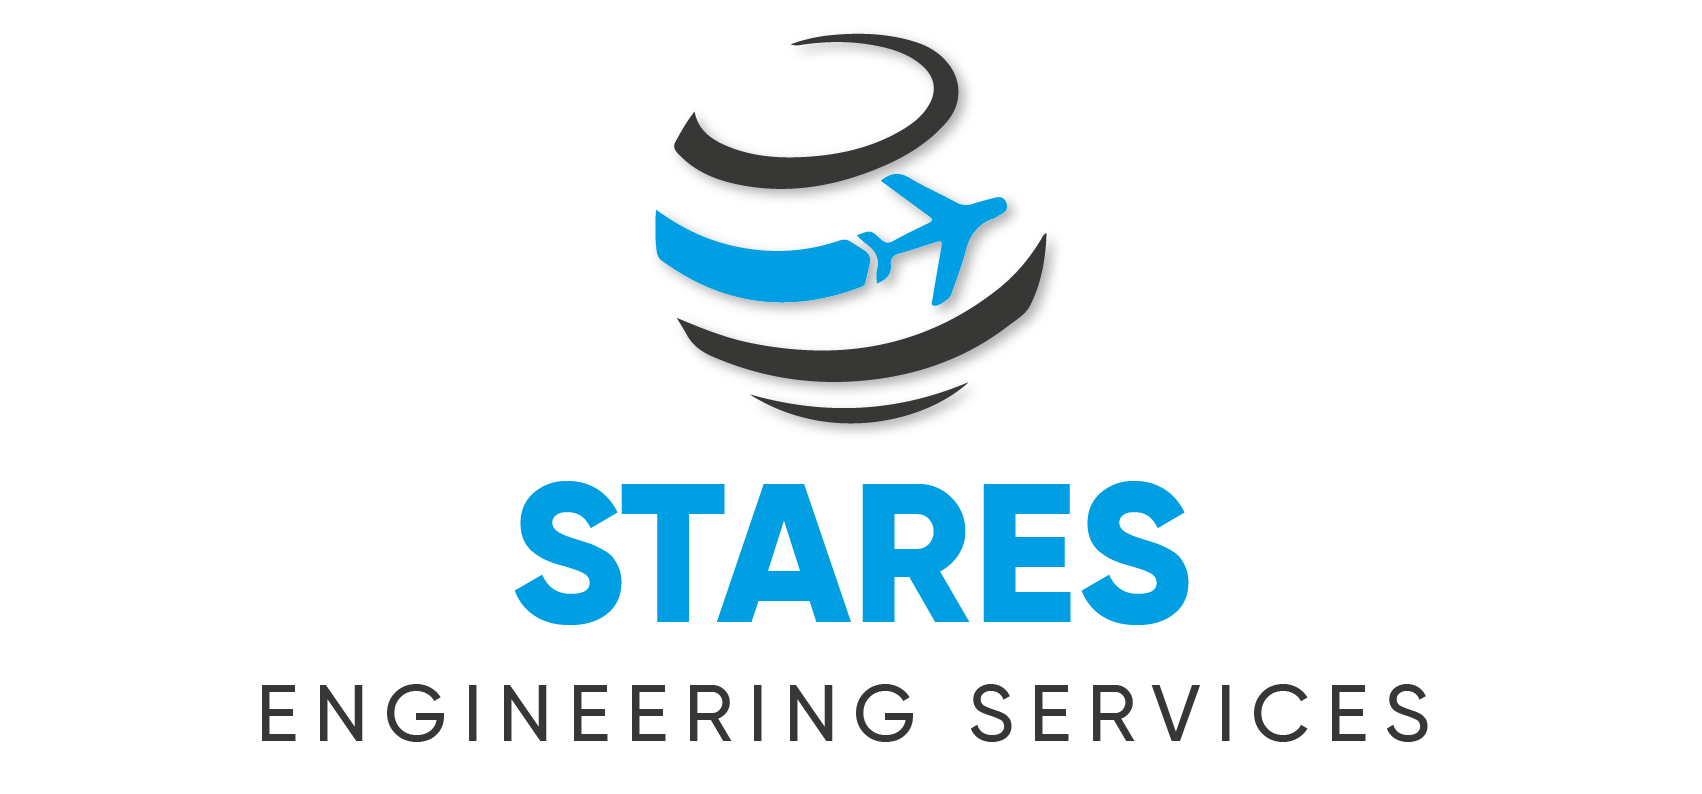 Stares Engineering Services